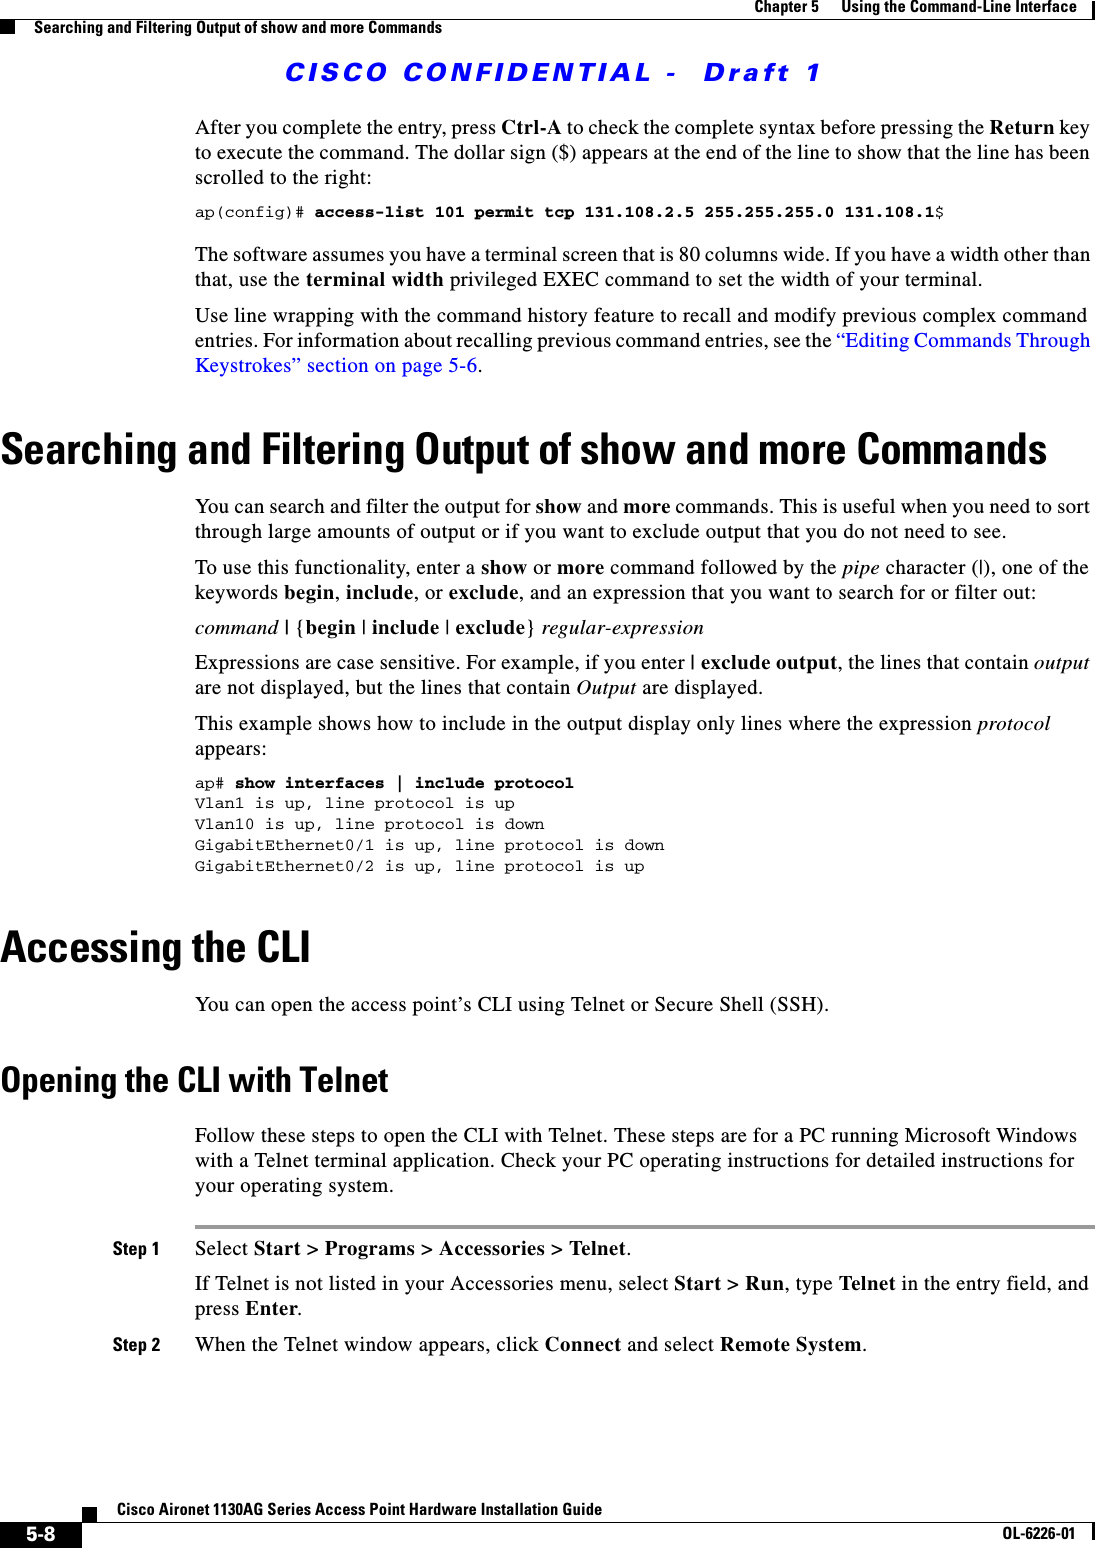  CISCO CONFIDENTIAL -  Draft 15-8Cisco Aironet 1130AG Series Access Point Hardware Installation GuideOL-6226-01Chapter 5      Using the Command-Line InterfaceSearching and Filtering Output of show and more CommandsAfter you complete the entry, press Ctrl-A to check the complete syntax before pressing the Return key to execute the command. The dollar sign ($) appears at the end of the line to show that the line has been scrolled to the right:ap(config)# access-list 101 permit tcp 131.108.2.5 255.255.255.0 131.108.1$The software assumes you have a terminal screen that is 80 columns wide. If you have a width other than that, use the terminal width privileged EXEC command to set the width of your terminal.Use line wrapping with the command history feature to recall and modify previous complex command entries. For information about recalling previous command entries, see the “Editing Commands Through Keystrokes” section on page 5-6.Searching and Filtering Output of show and more CommandsYou can search and filter the output for show and more commands. This is useful when you need to sort through large amounts of output or if you want to exclude output that you do not need to see.To use this functionality, enter a show or more command followed by the pipe character (|), one of the keywords begin, include, or exclude, and an expression that you want to search for or filter out:command | {begin | include | exclude} regular-expressionExpressions are case sensitive. For example, if you enter | exclude output, the lines that contain output are not displayed, but the lines that contain Output are displayed.This example shows how to include in the output display only lines where the expression protocol appears:ap# show interfaces | include protocolVlan1 is up, line protocol is upVlan10 is up, line protocol is downGigabitEthernet0/1 is up, line protocol is downGigabitEthernet0/2 is up, line protocol is up Accessing the CLIYou can open the access point’s CLI using Telnet or Secure Shell (SSH). Opening the CLI with TelnetFollow these steps to open the CLI with Telnet. These steps are for a PC running Microsoft Windows with a Telnet terminal application. Check your PC operating instructions for detailed instructions for your operating system.Step 1 Select Start &gt; Programs &gt; Accessories &gt; Telnet. If Telnet is not listed in your Accessories menu, select Start &gt; Run, type Telnet in the entry field, and press Enter. Step 2 When the Telnet window appears, click Connect and select Remote System.